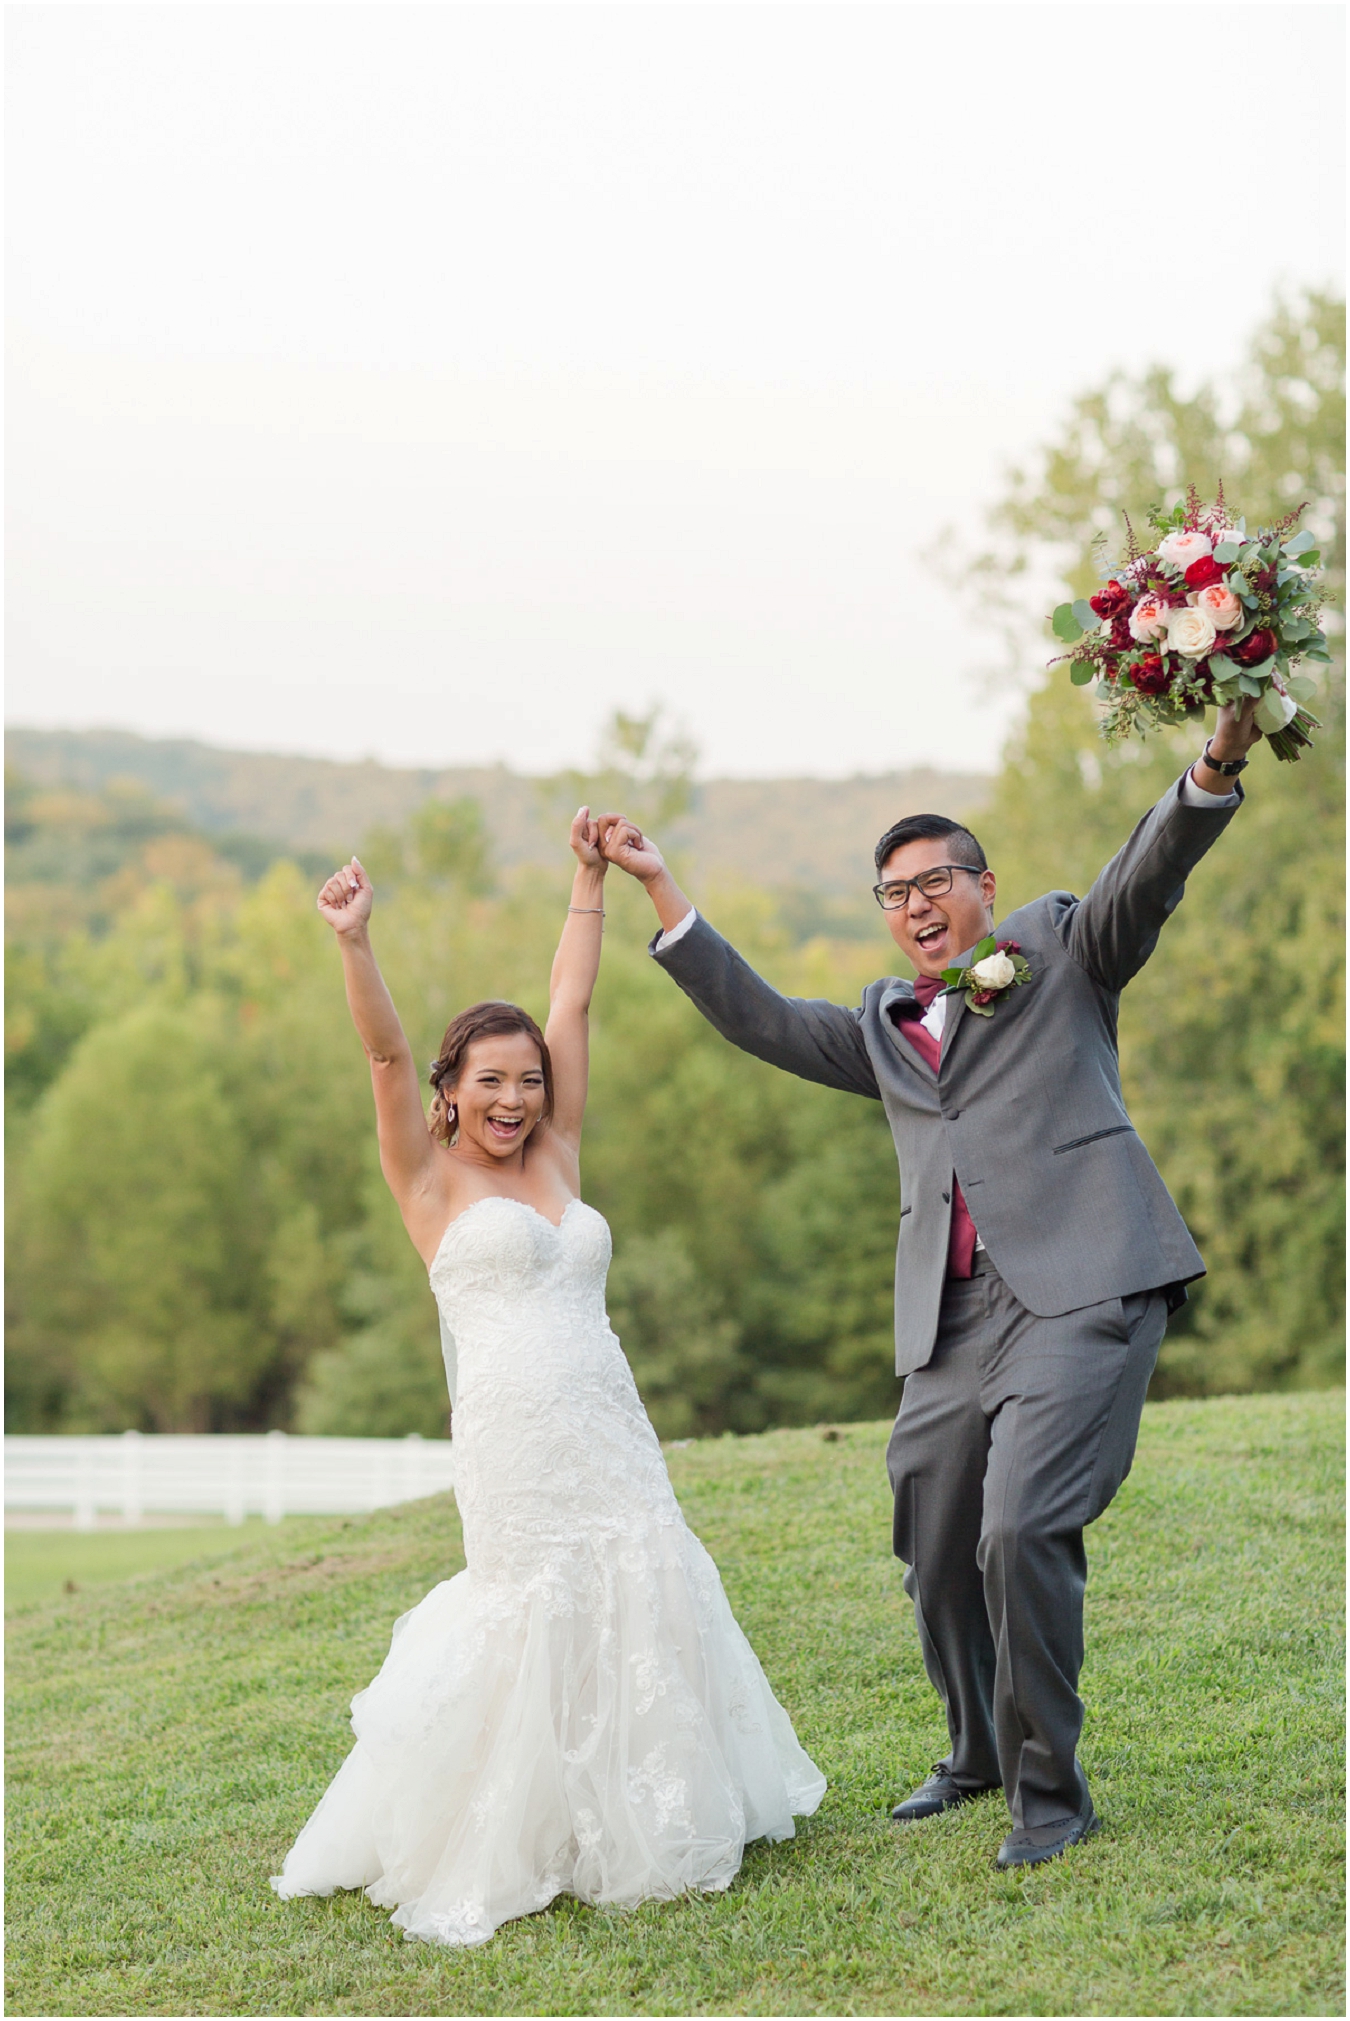 Chaumette Vineyards and Winery Wedding Ste. Genevieve Photographer Aleen and Rich bride and groom portrait